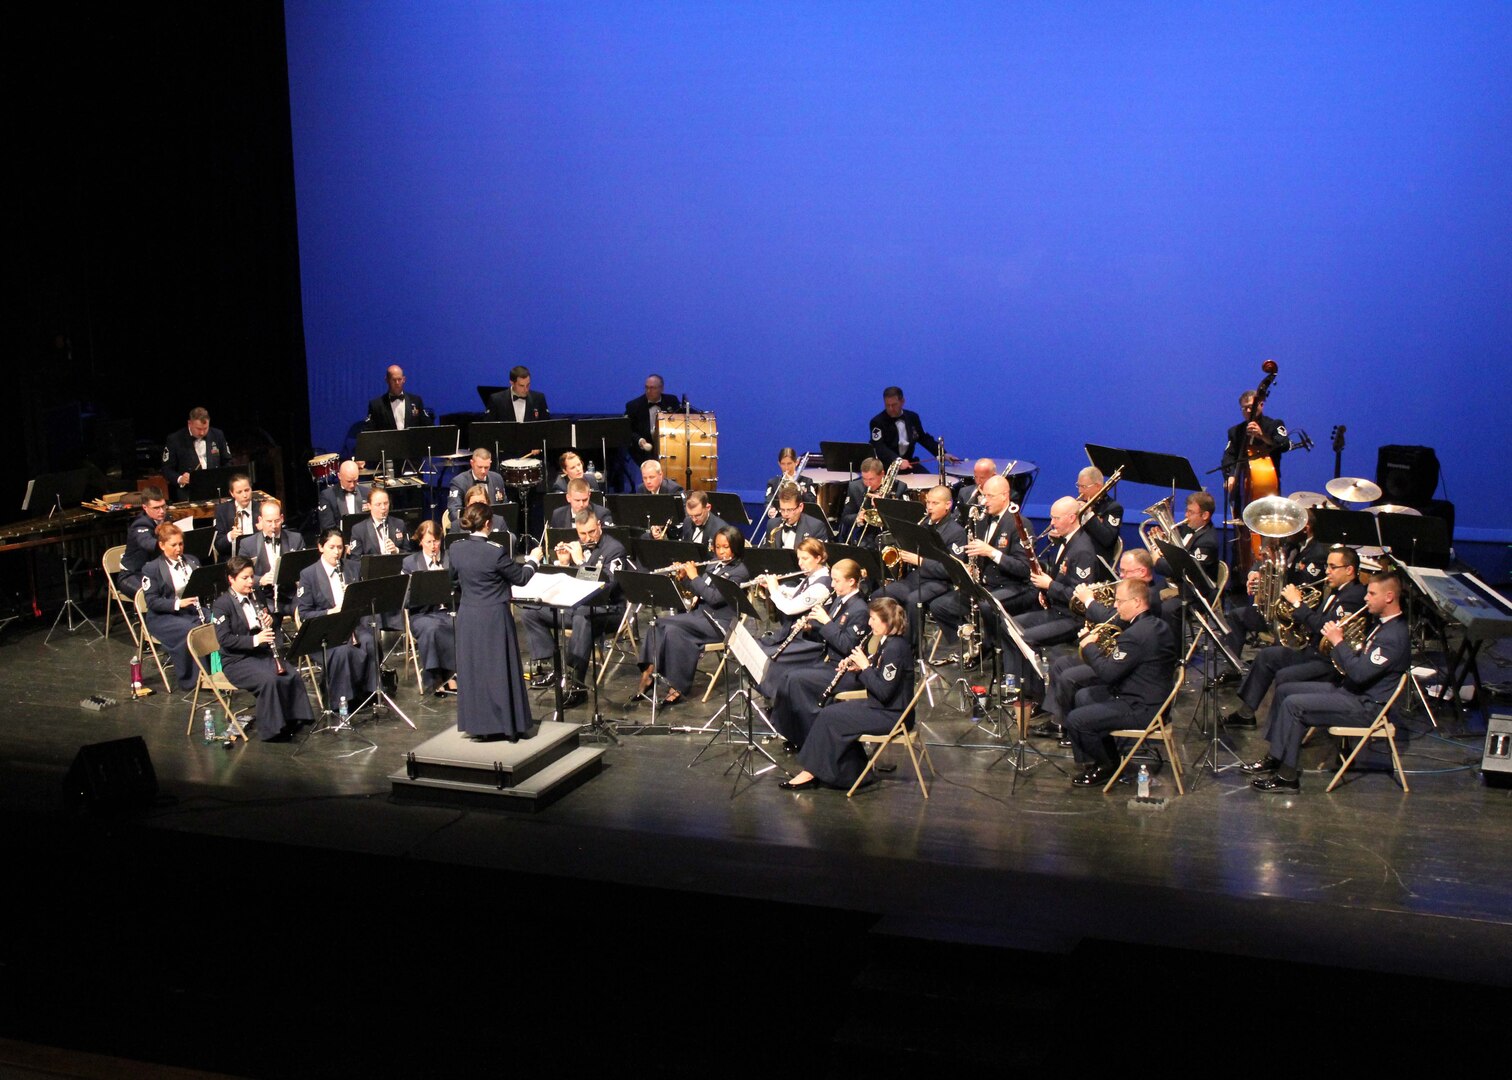 Holiday in Blue concerts to be held Dec. 1011 at Laurie Auditorium